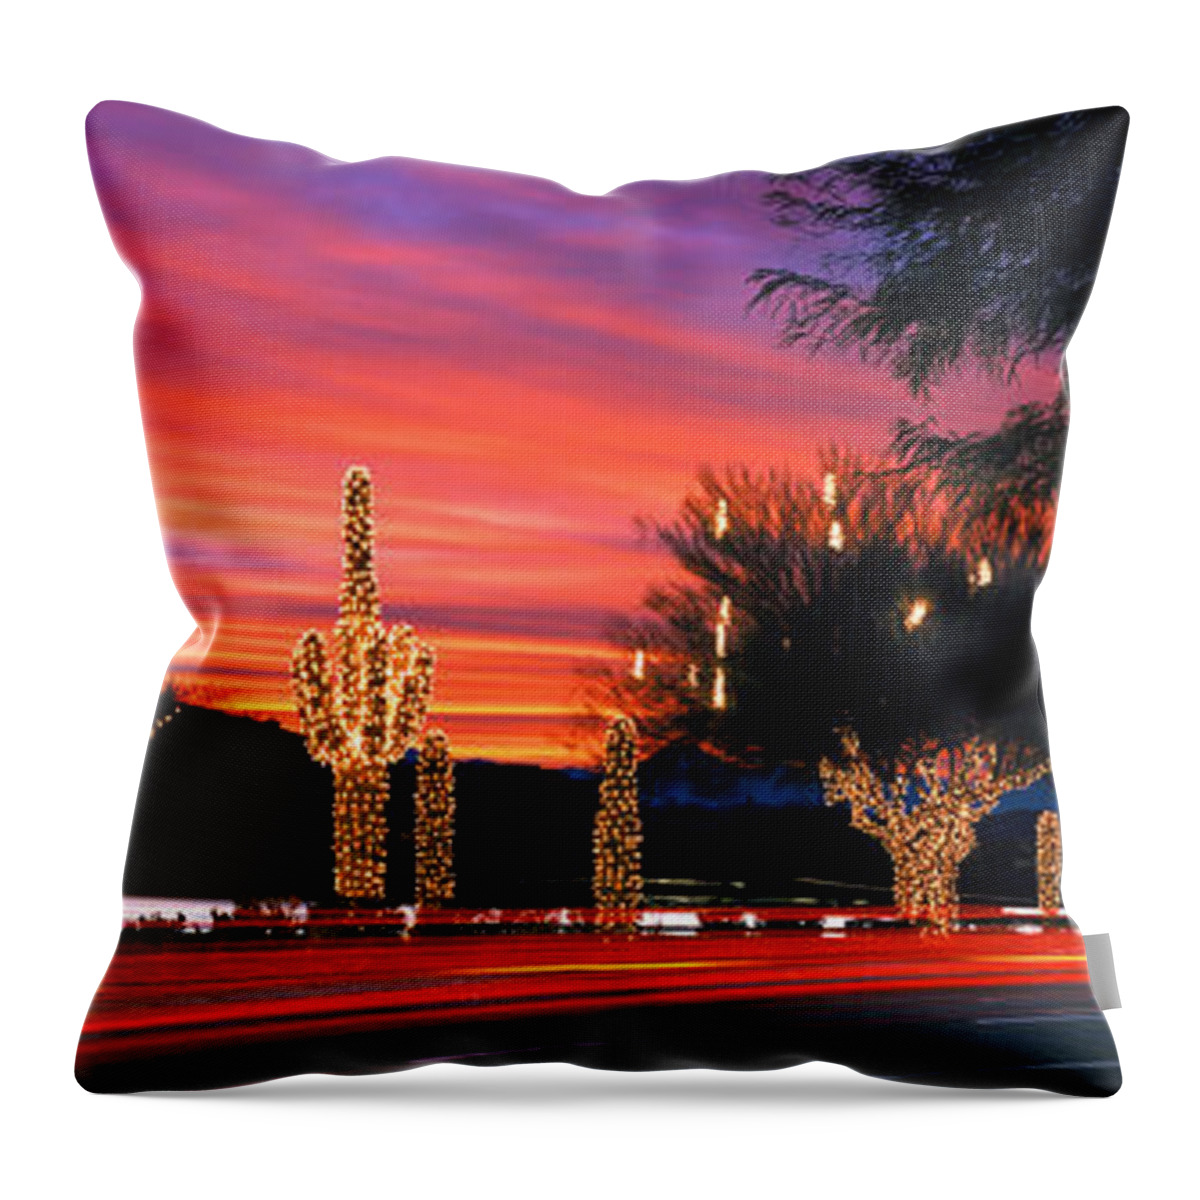 Photography Throw Pillow featuring the photograph Christmas, Phoenix, Arizona, Usa by Panoramic Images